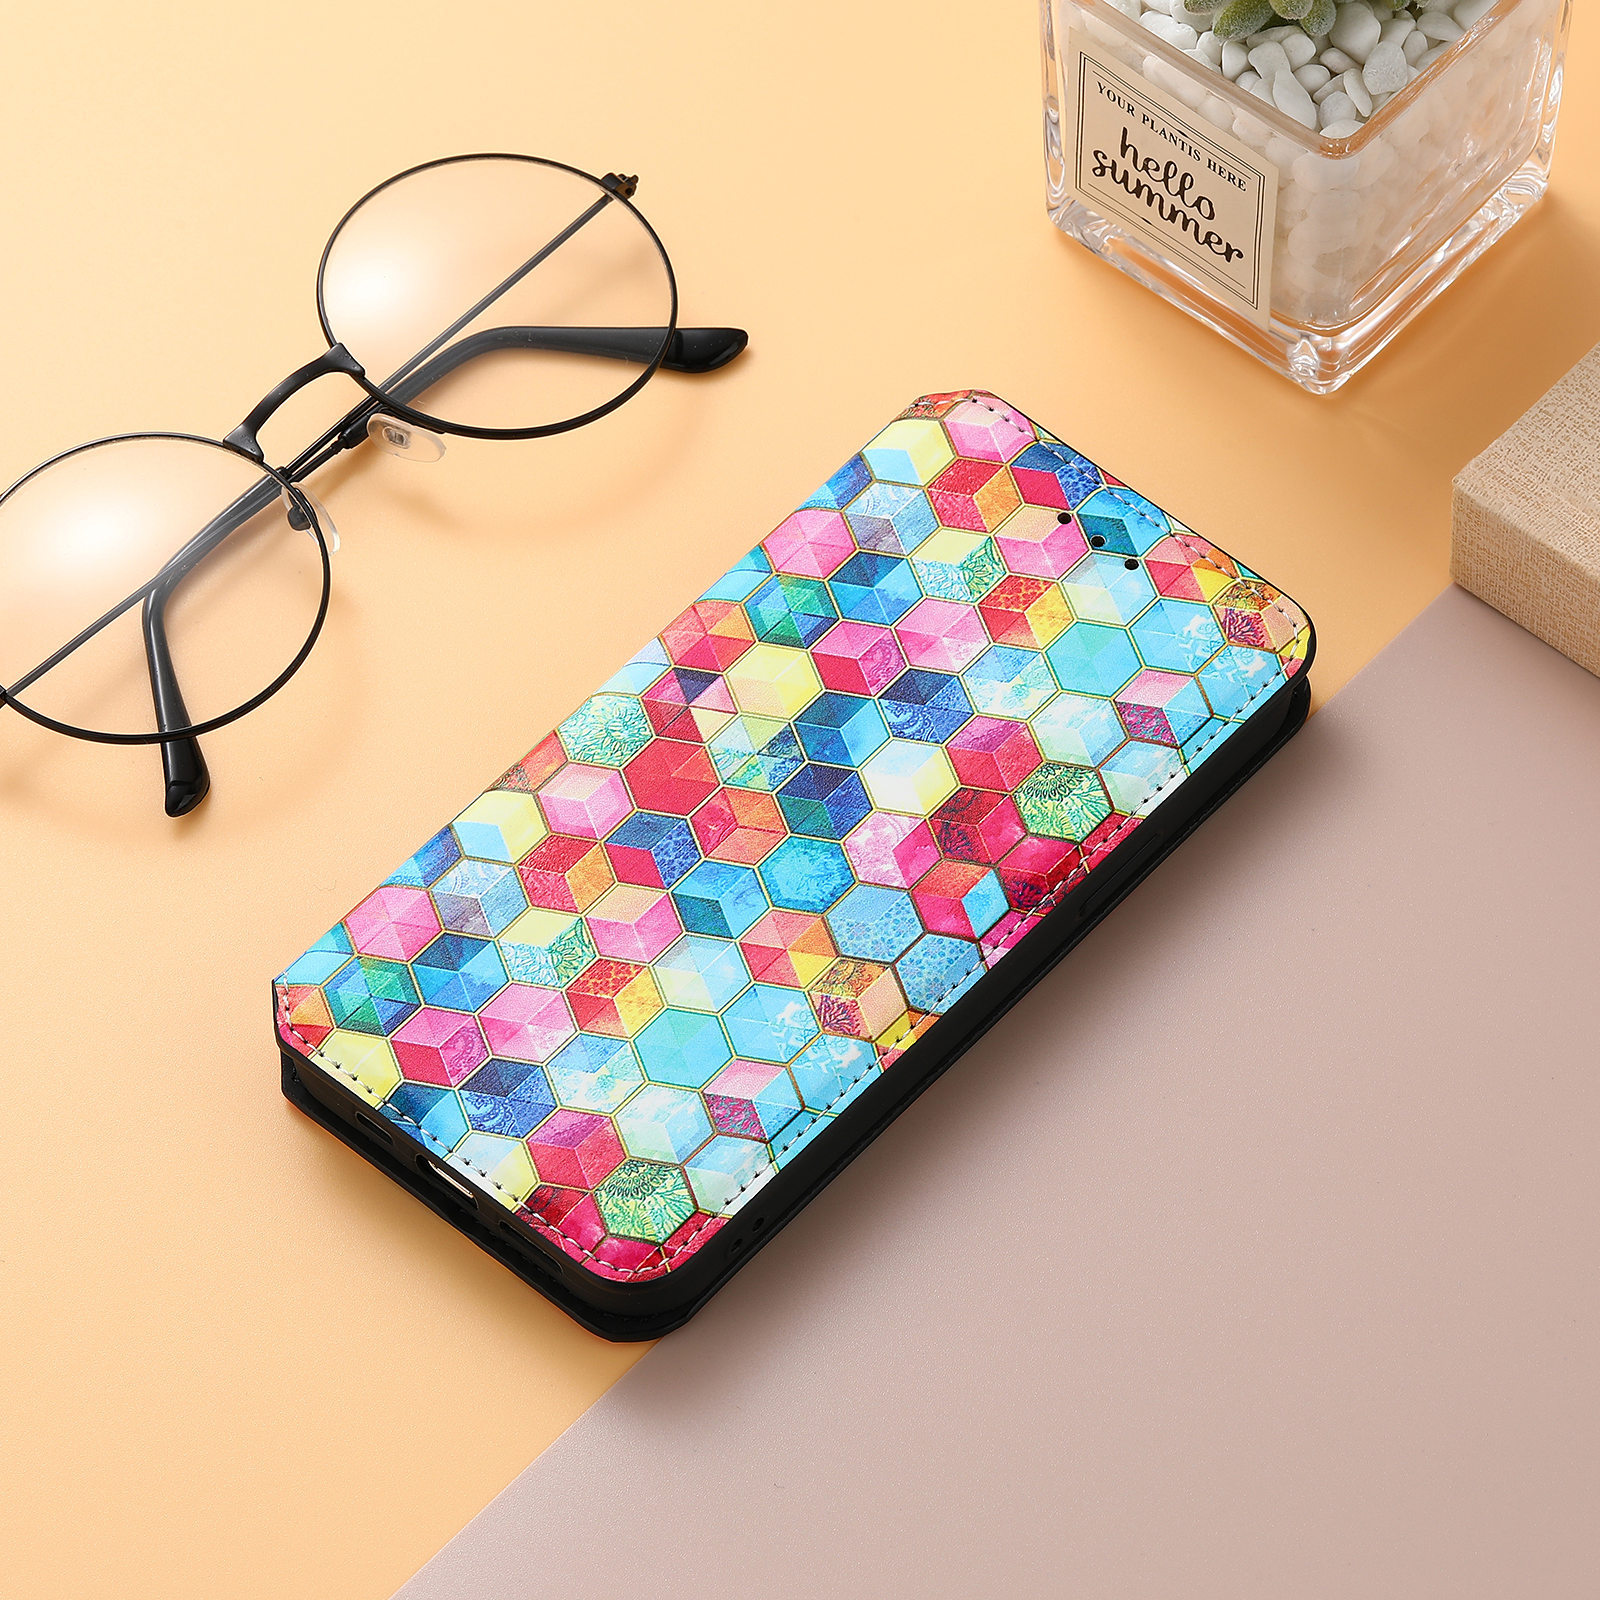 Bakeey for iPhone 13 Mini/ 13 Pro Max Case Colorful Printing Pattern Magnetic Flip with Multi-Card Slot Wallet Stand Full Cover Protective Cover